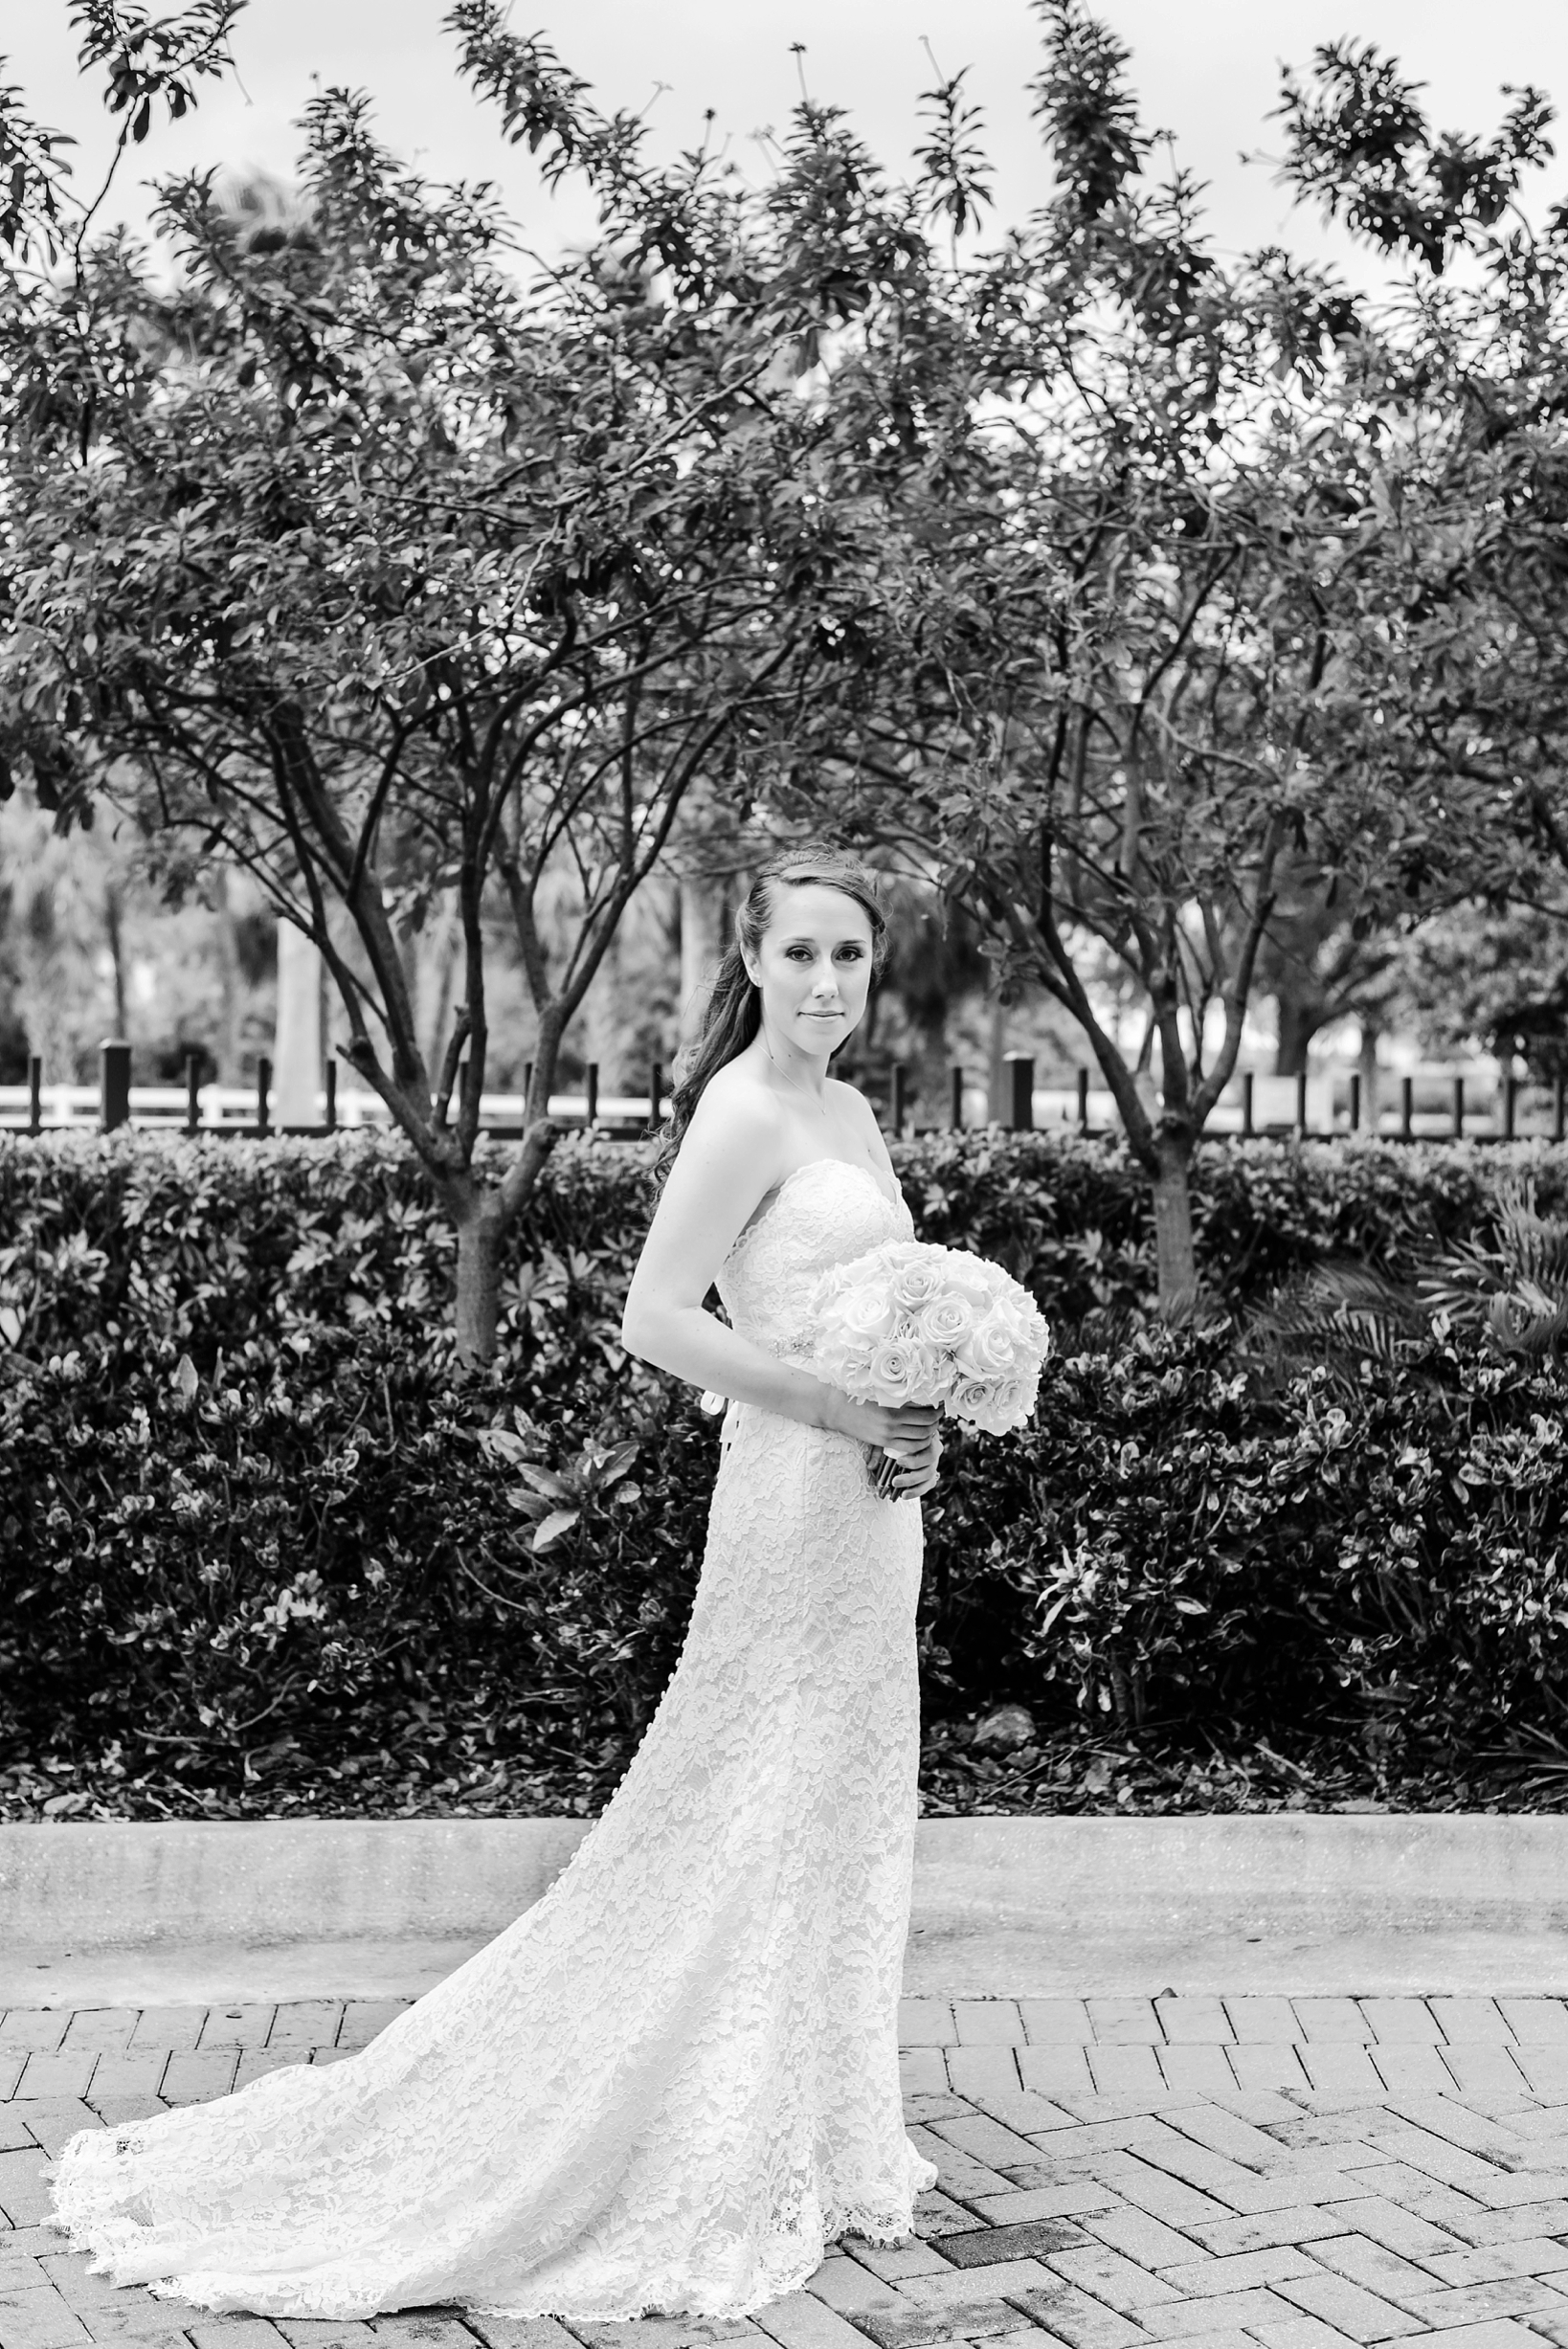 Black and white classic image of the bride on her wedding day